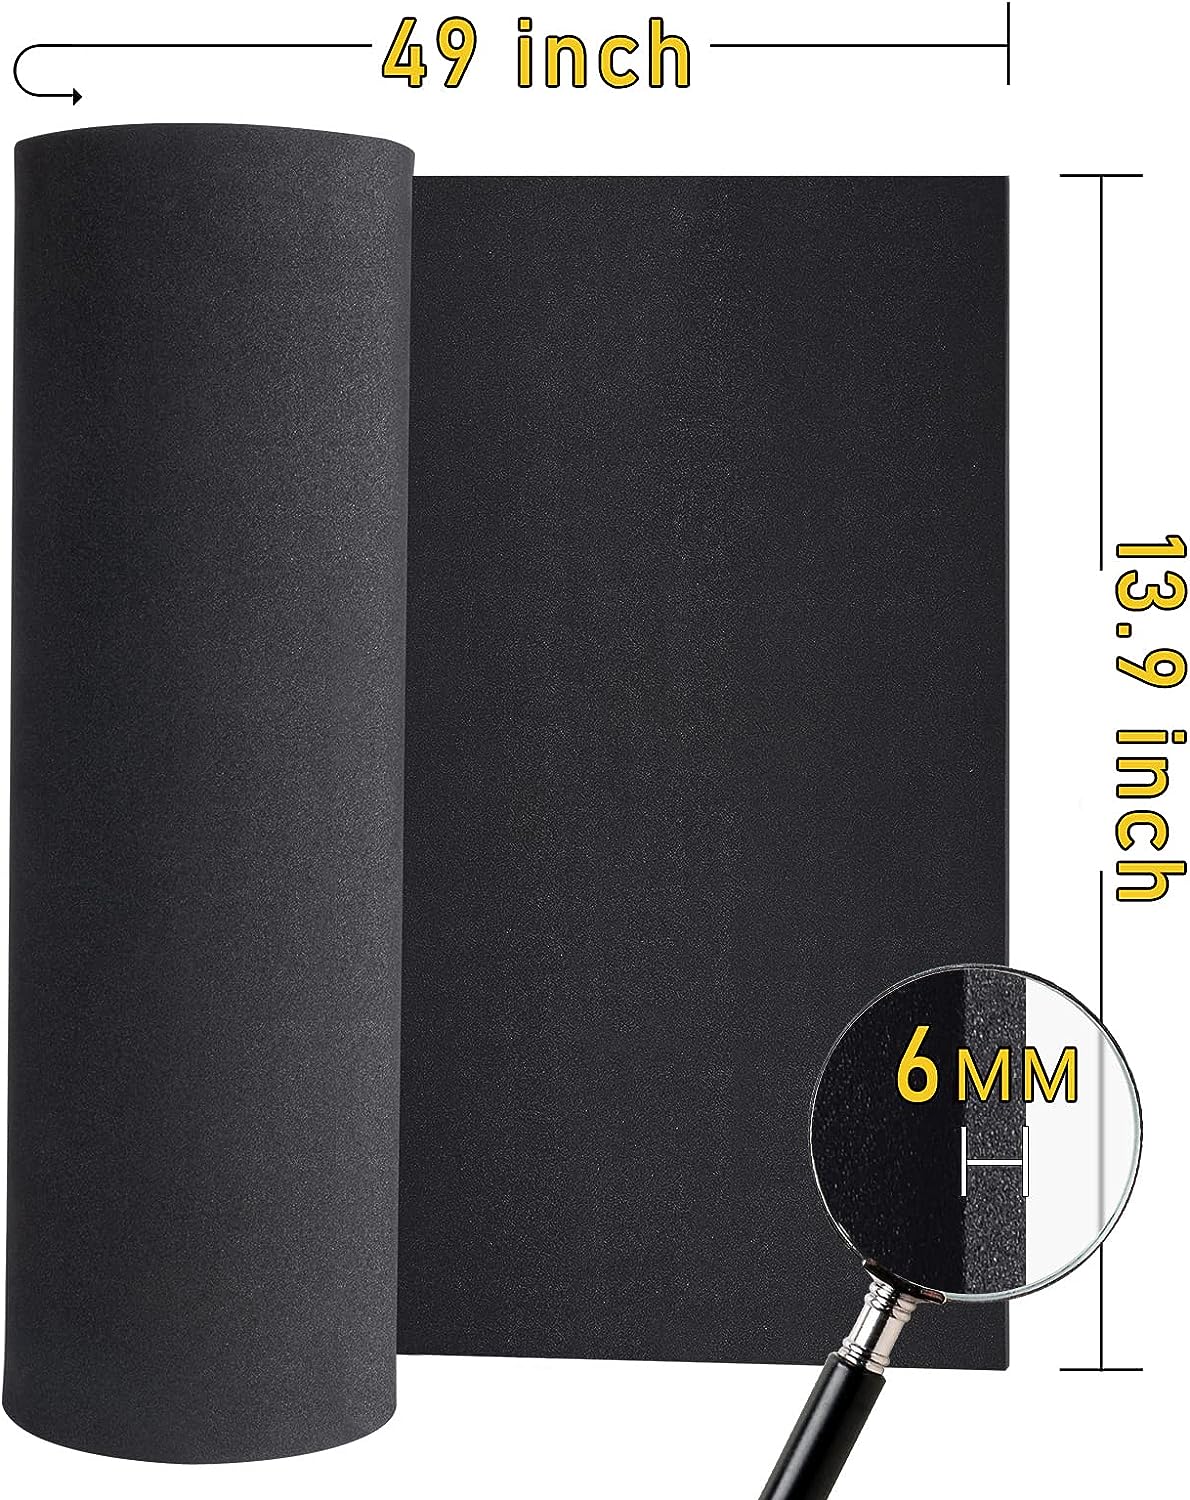 Black Foam Sheets Roll Premium Cosplay Eva Foam Sheet 6mm Thick 49"x13.9" High Density 86kg/m3 For Cosplay Costume Crafts DIY Projects By PAIDU